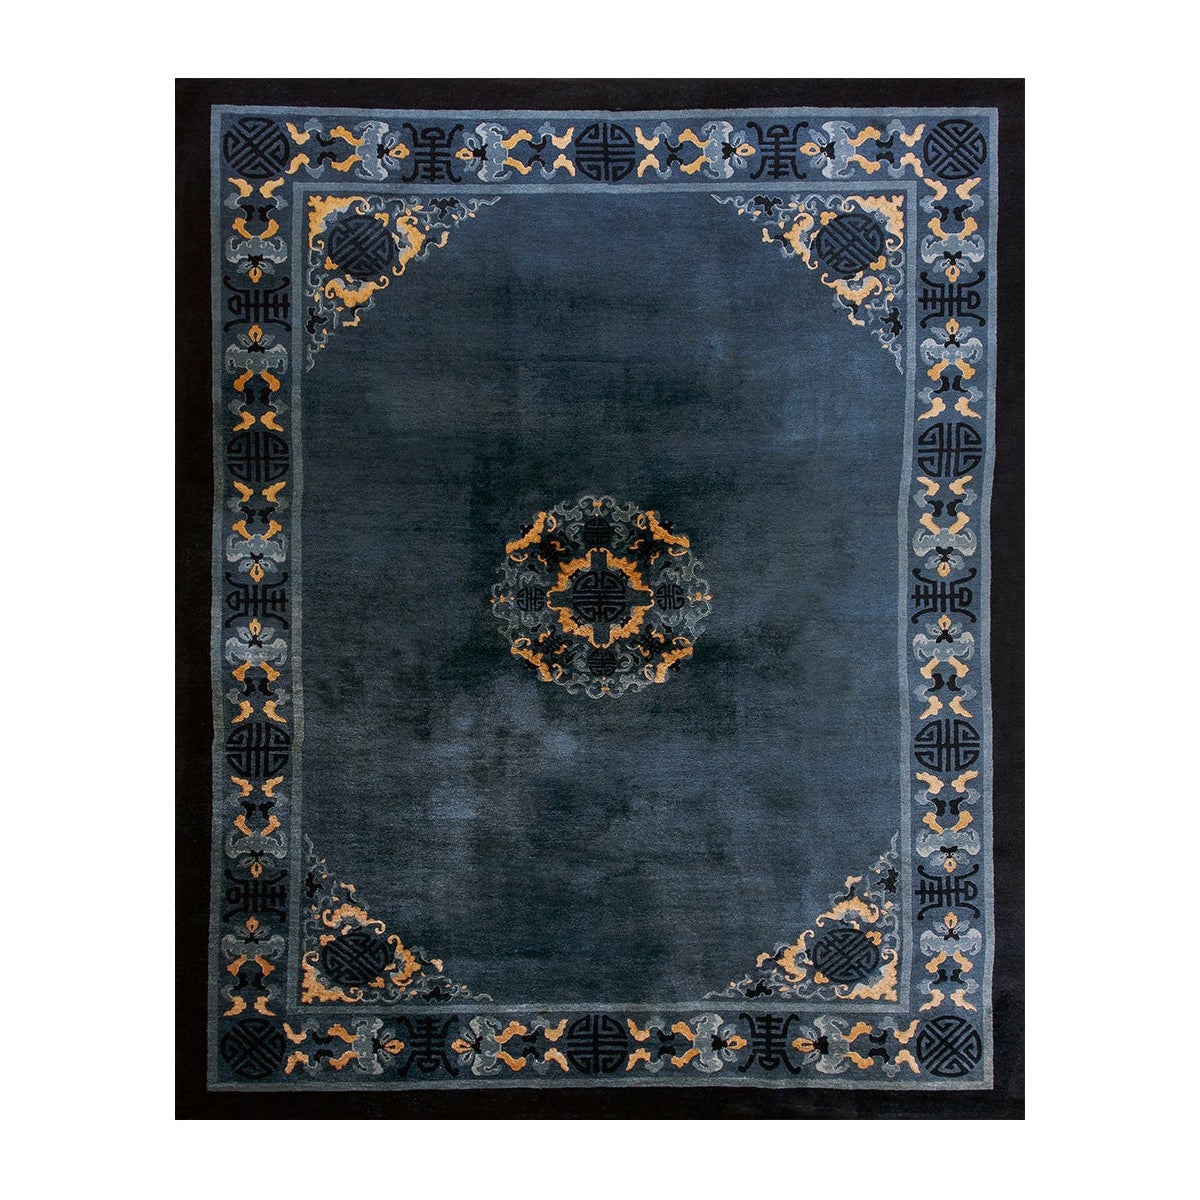 Late 19th Century Chinese Peking Carpet ( 9'3" x 11'10" - 282 x 360 ) For Sale